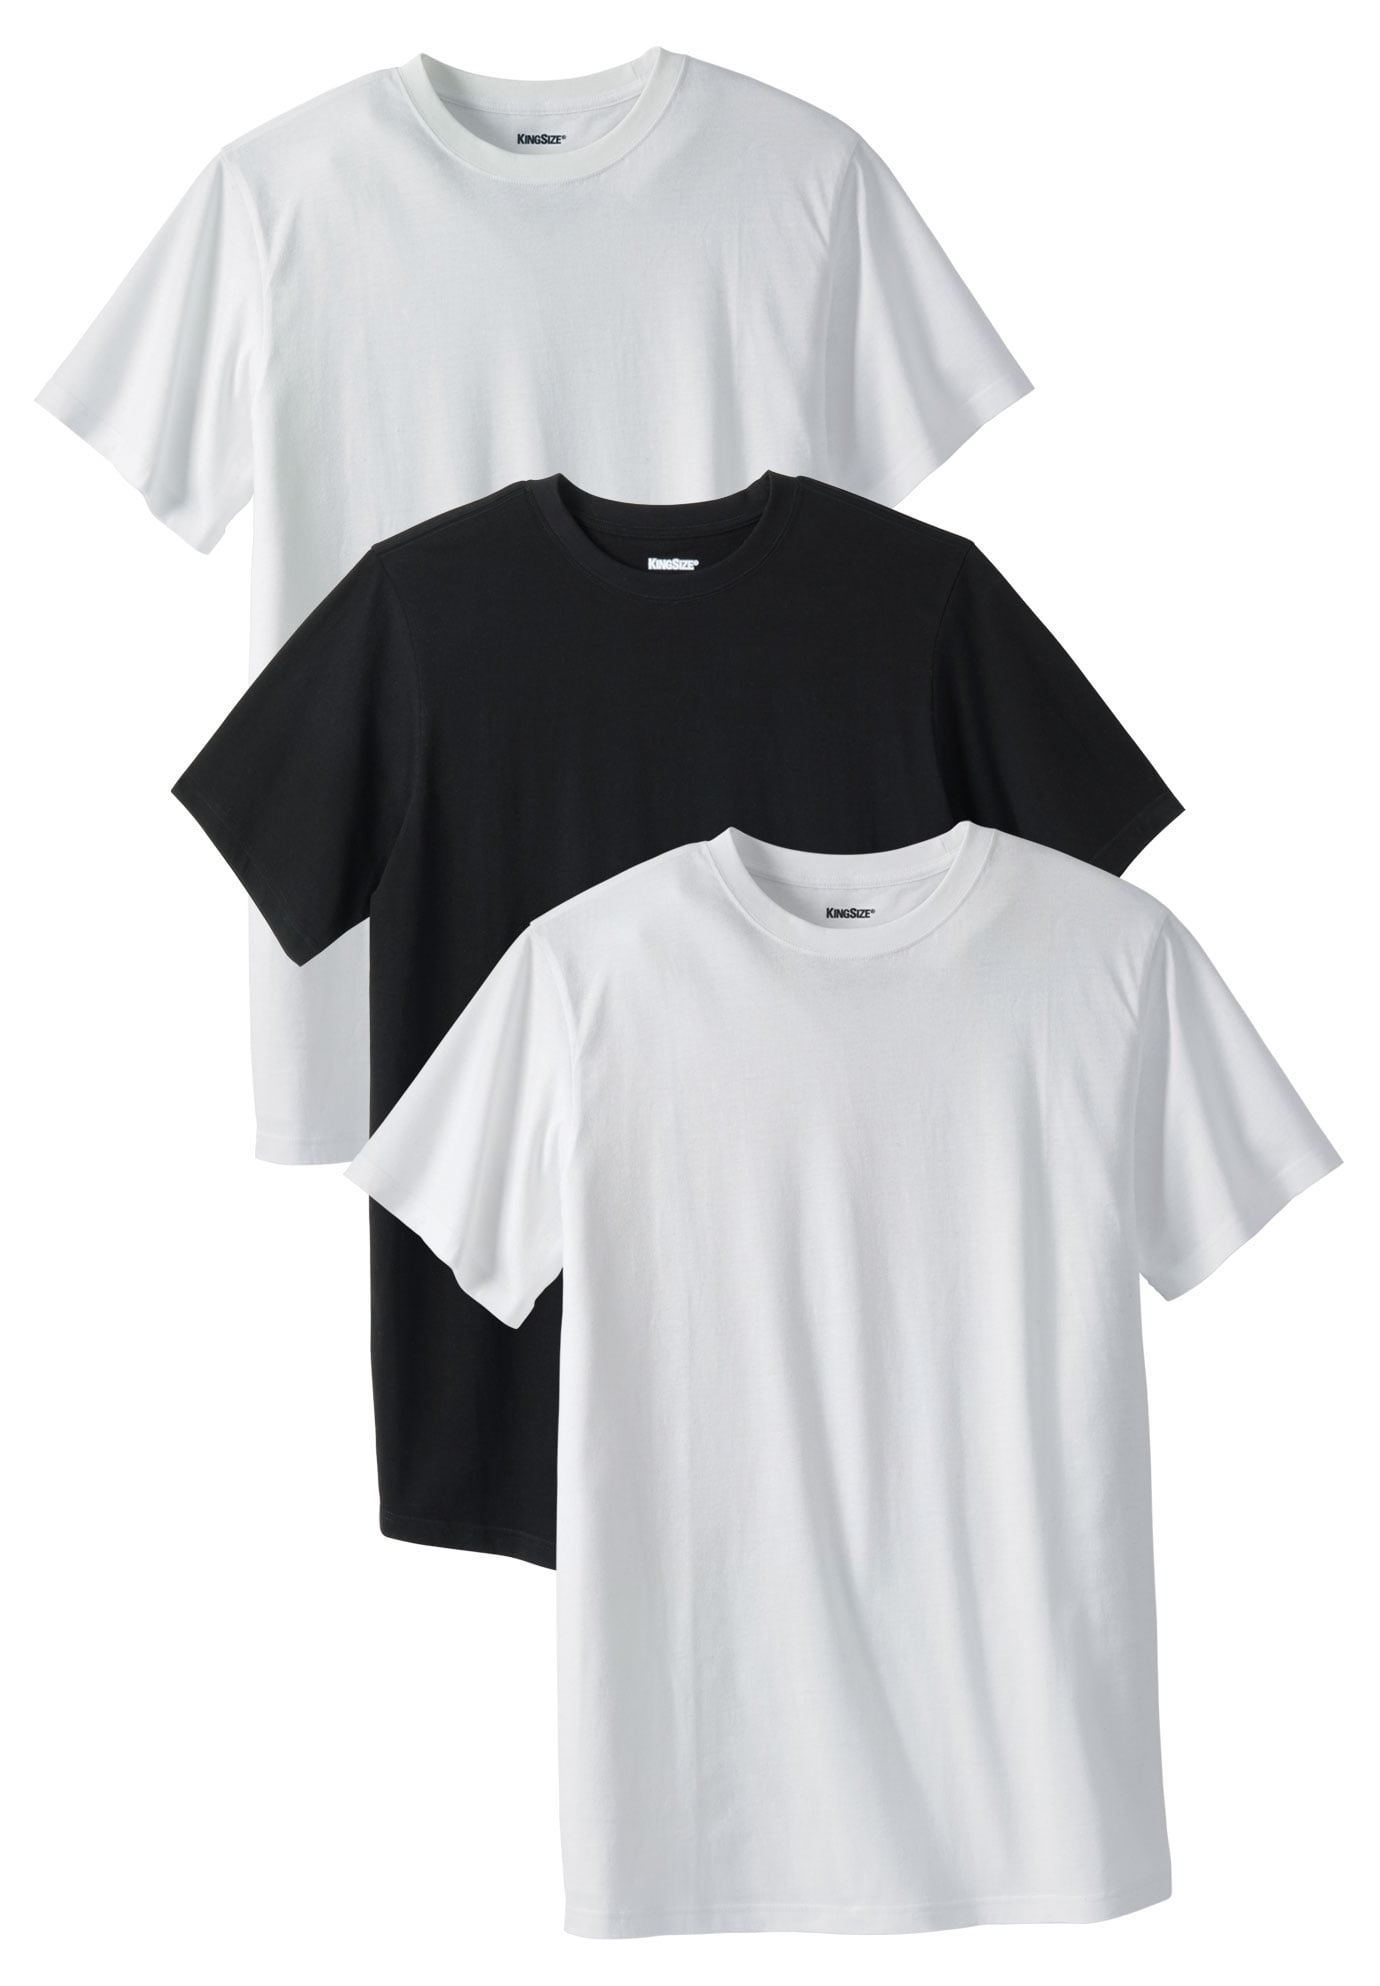 Details about   Stafford 4-Pack Men's Big & Tall Heavyweight Cotton V-Neck T-Shirts TALL 